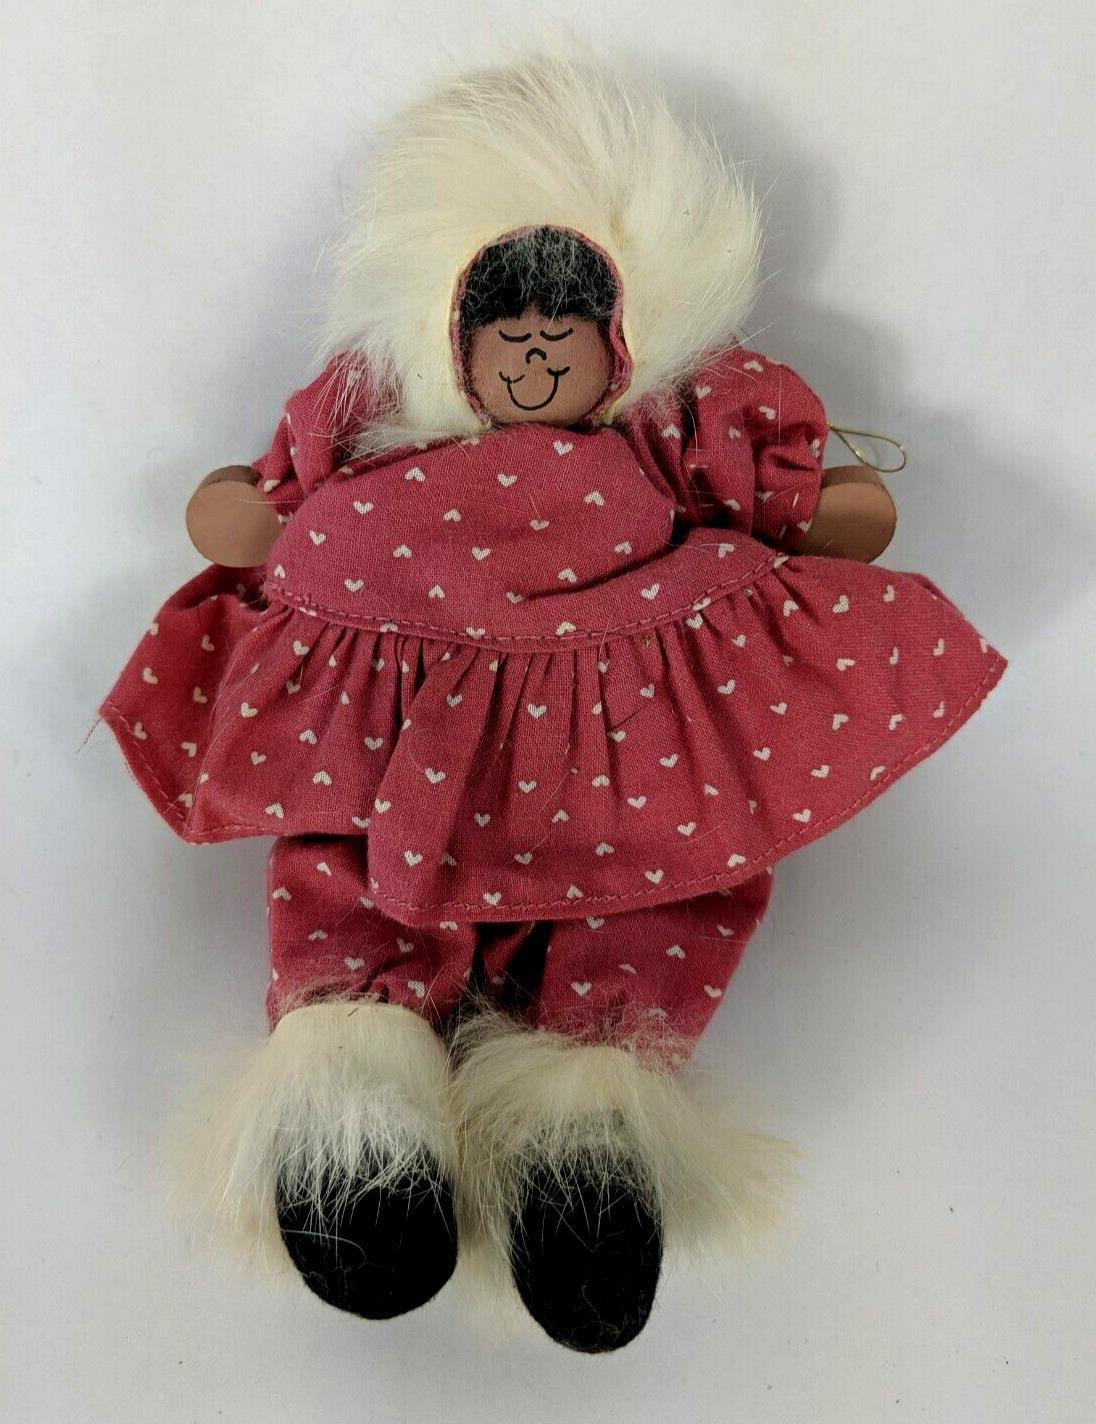 Little Bit Alaskan Doll, 7 Inch, Made In Alaska, Ornaments From the North